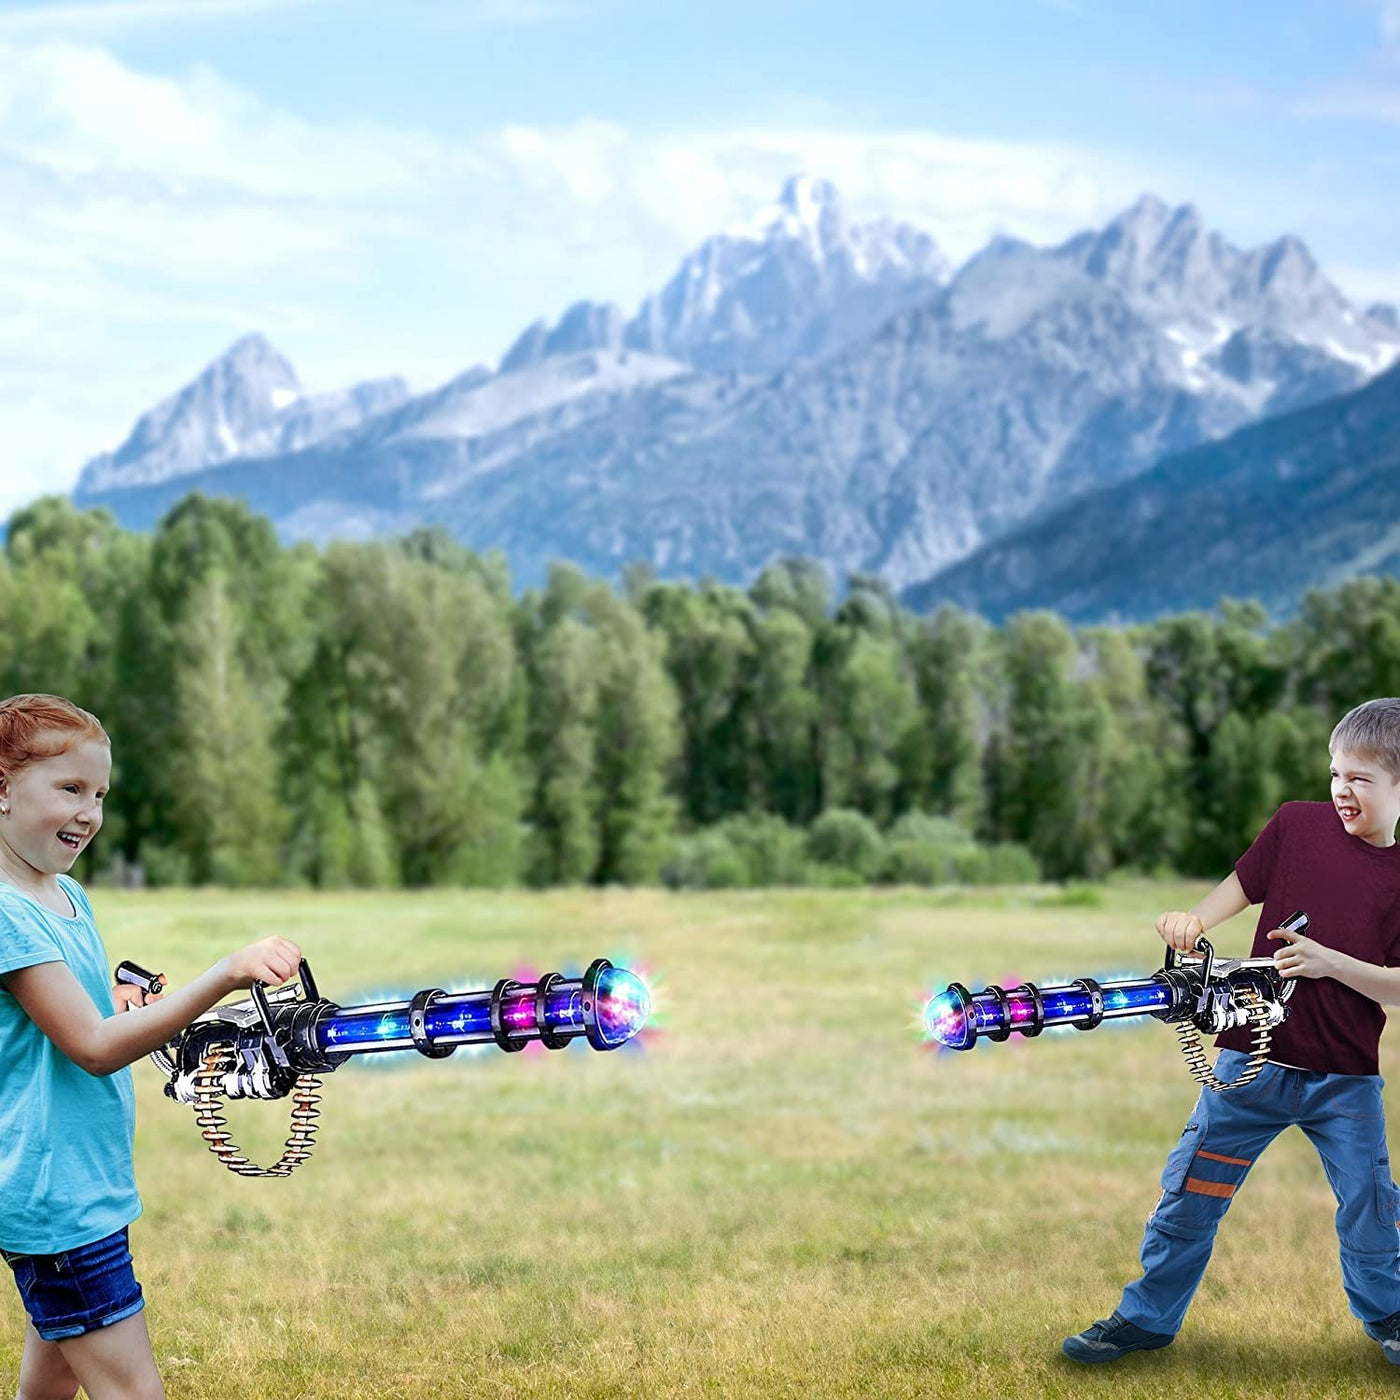 Light Up Rotary Machine Toy Gun with Tripod Stand Rotating Barrel, LED and Sound Effects - 23" Pretend Play Military Rifle - Batteries Included - Great Gift for Boys and Girls